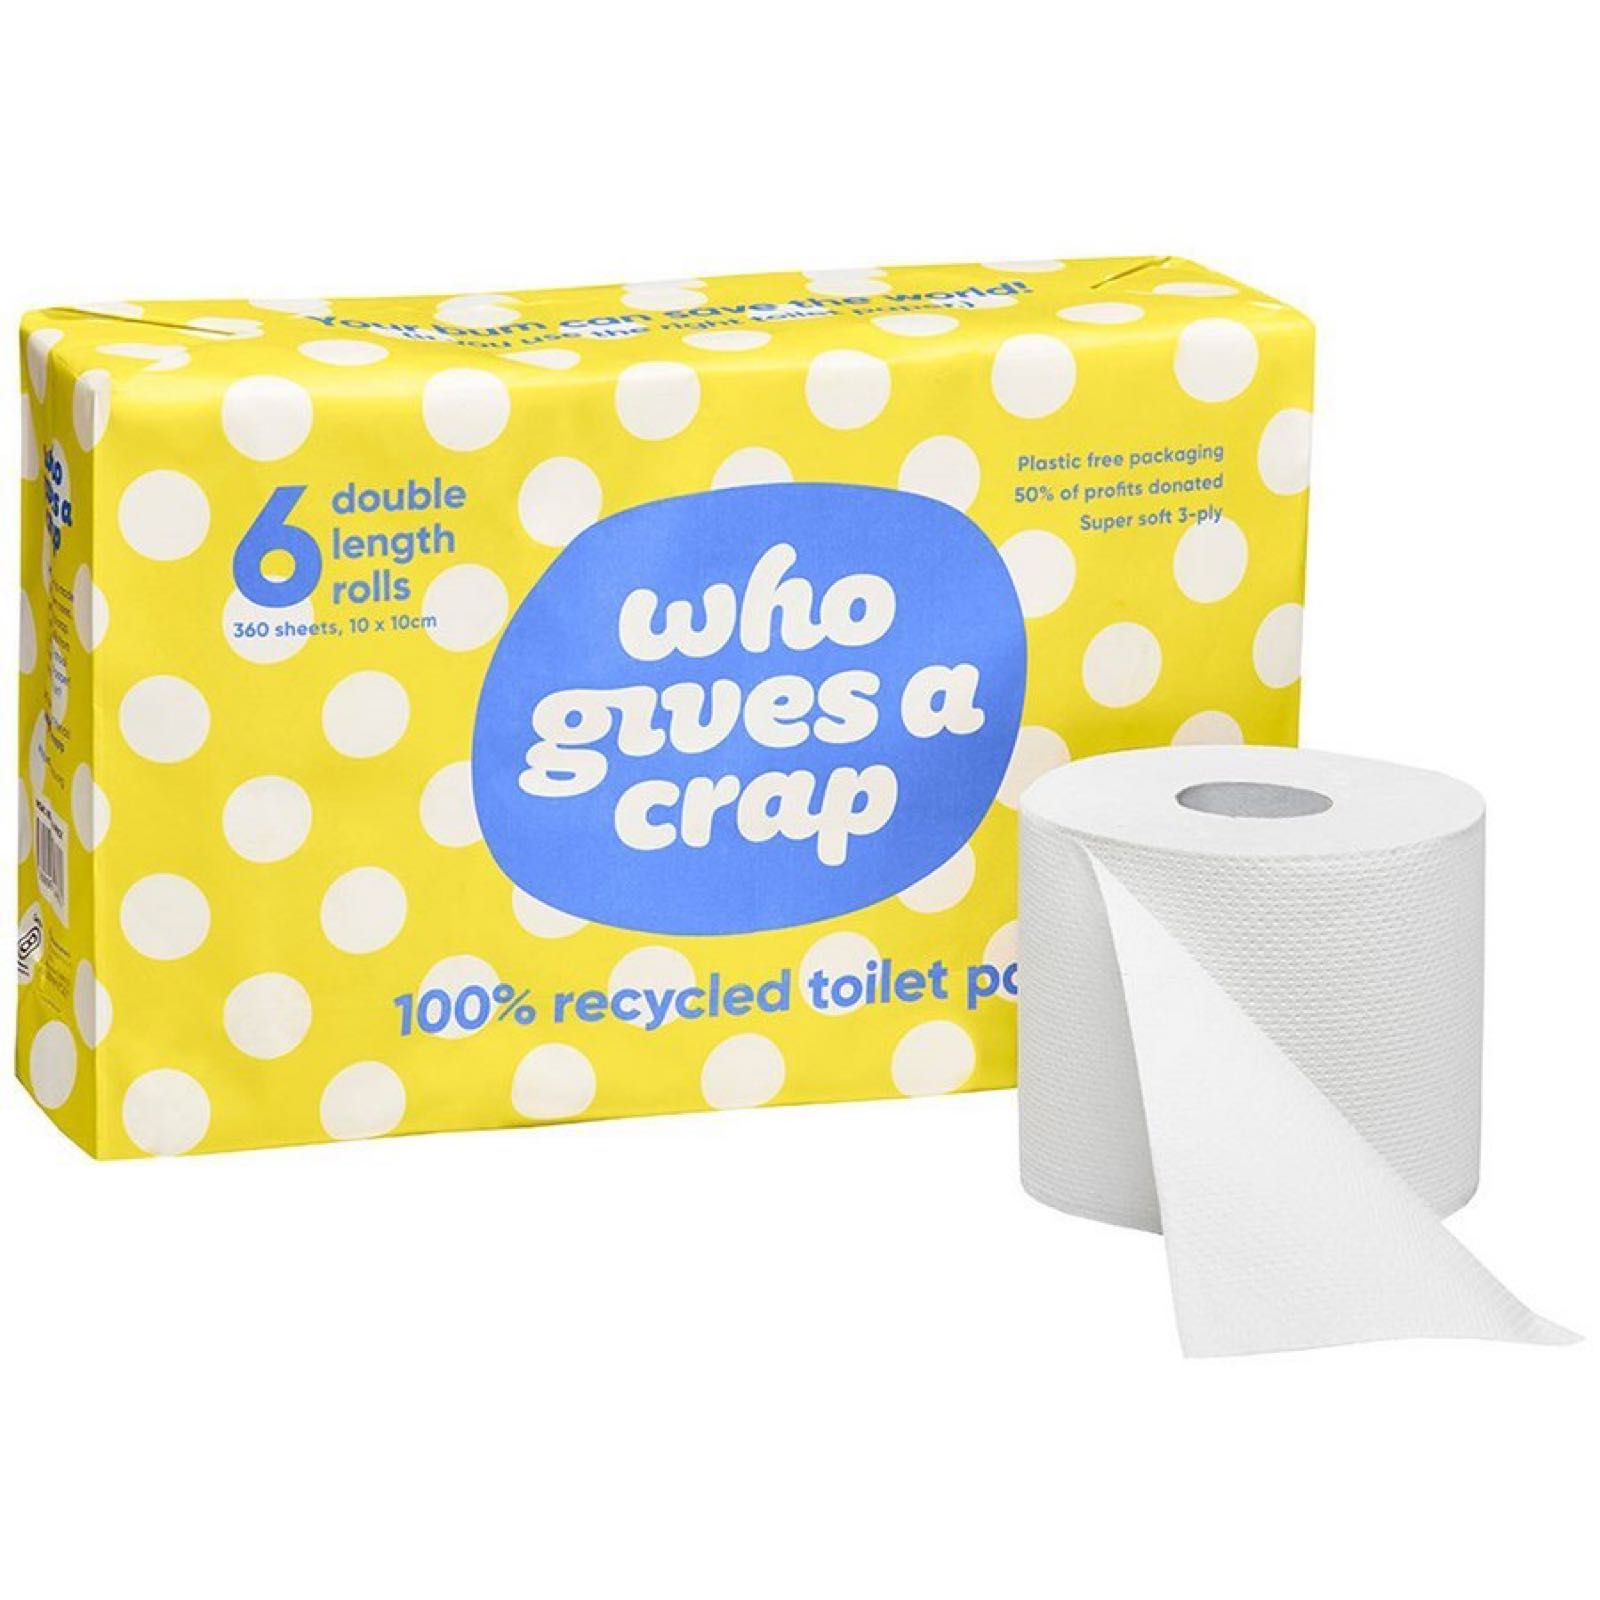 WGAC 6 Pack Toilet Roll, Recycled